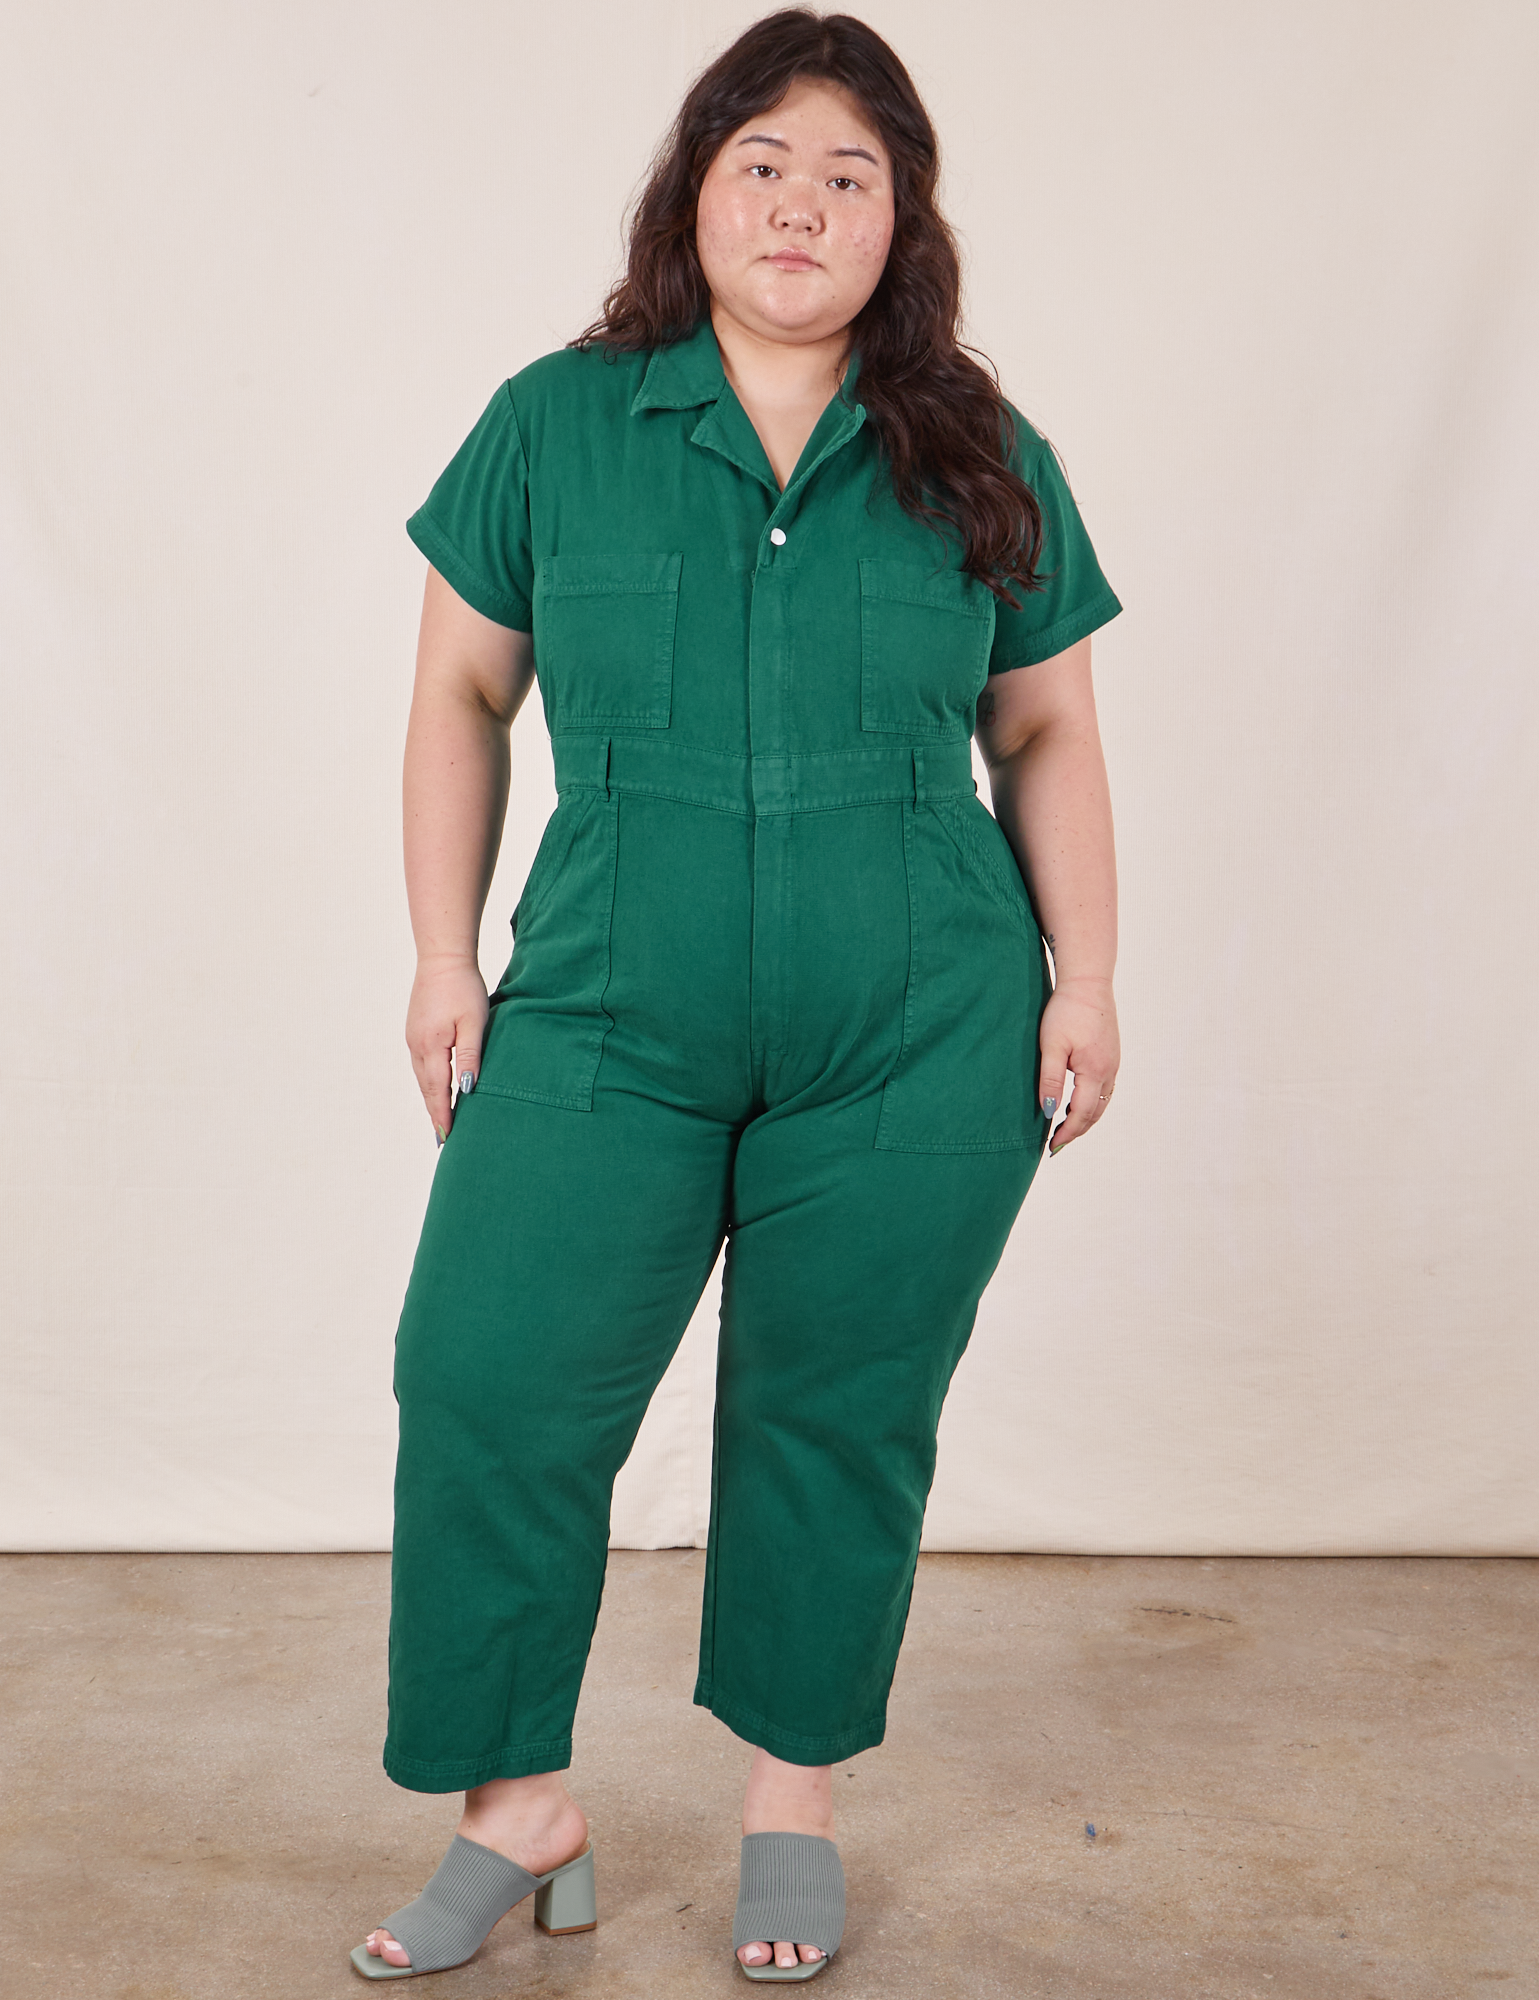 Ashley is 5’7” and wearing 1XL Petite Short Sleeve Jumpsuit in Hunter Green 